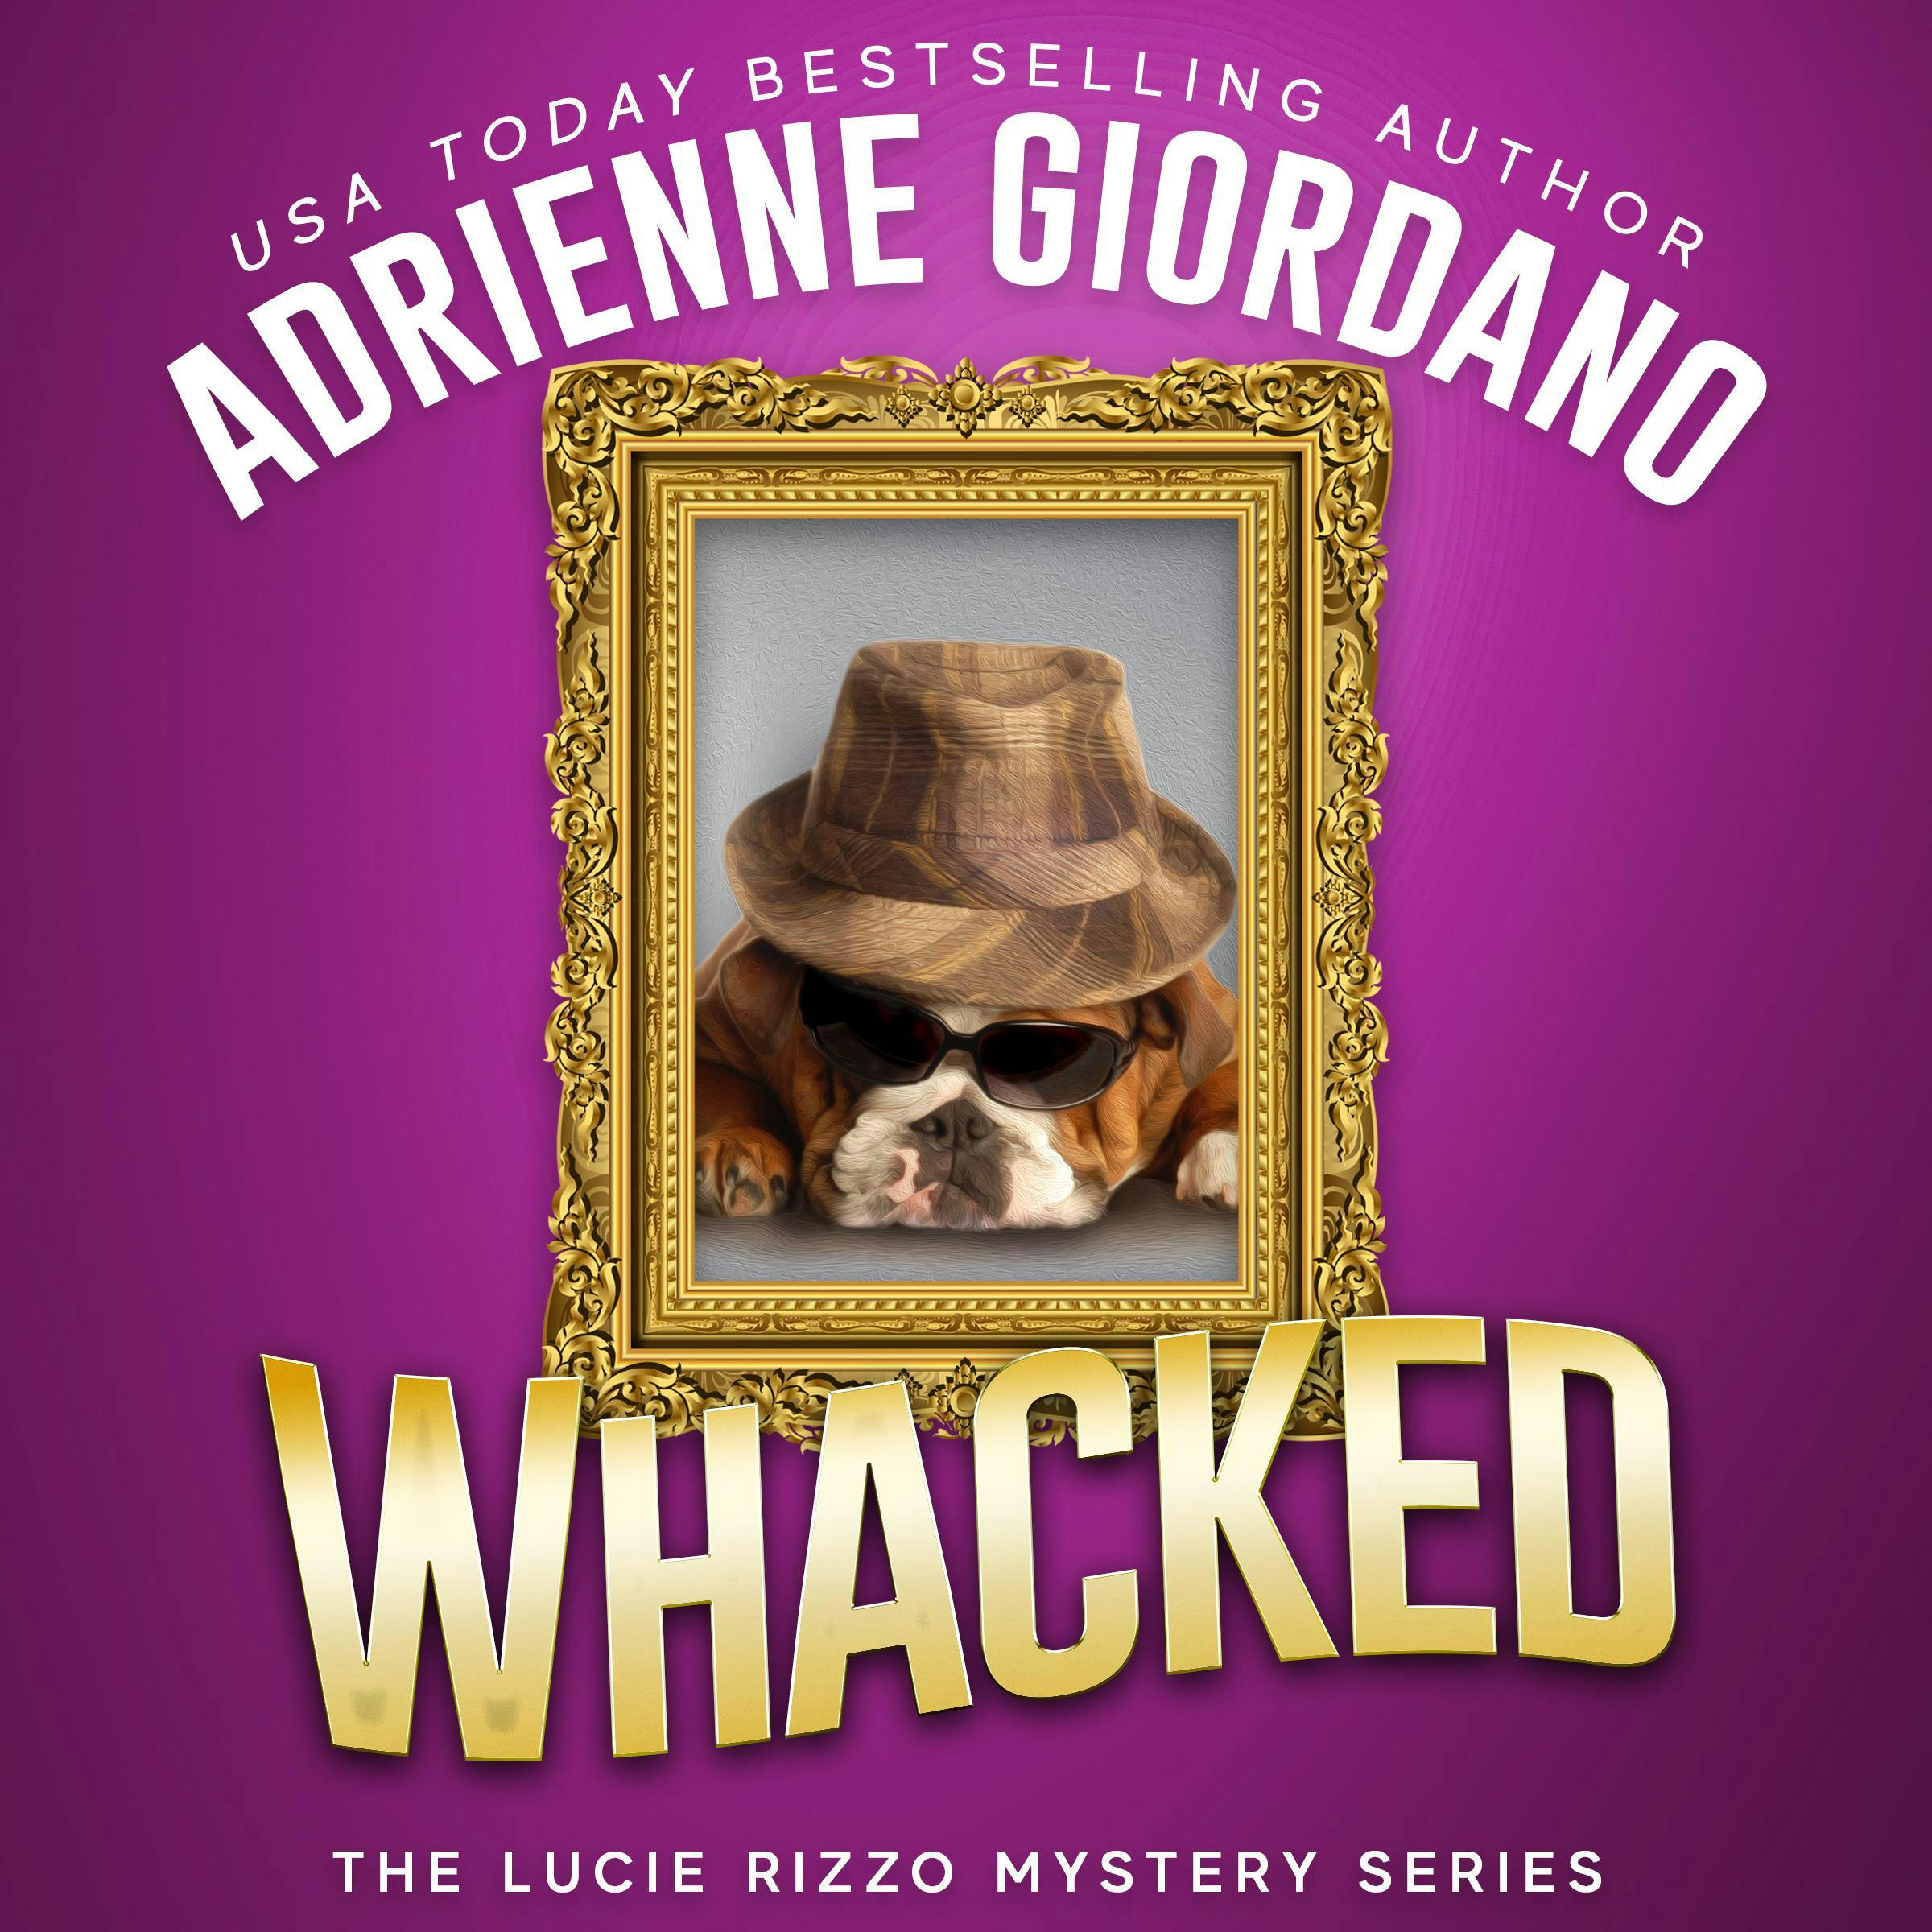 Whacked: Mobsters, Murder, and Mayhem. A Cozy Mystery Comedy - Adrienne Giordano